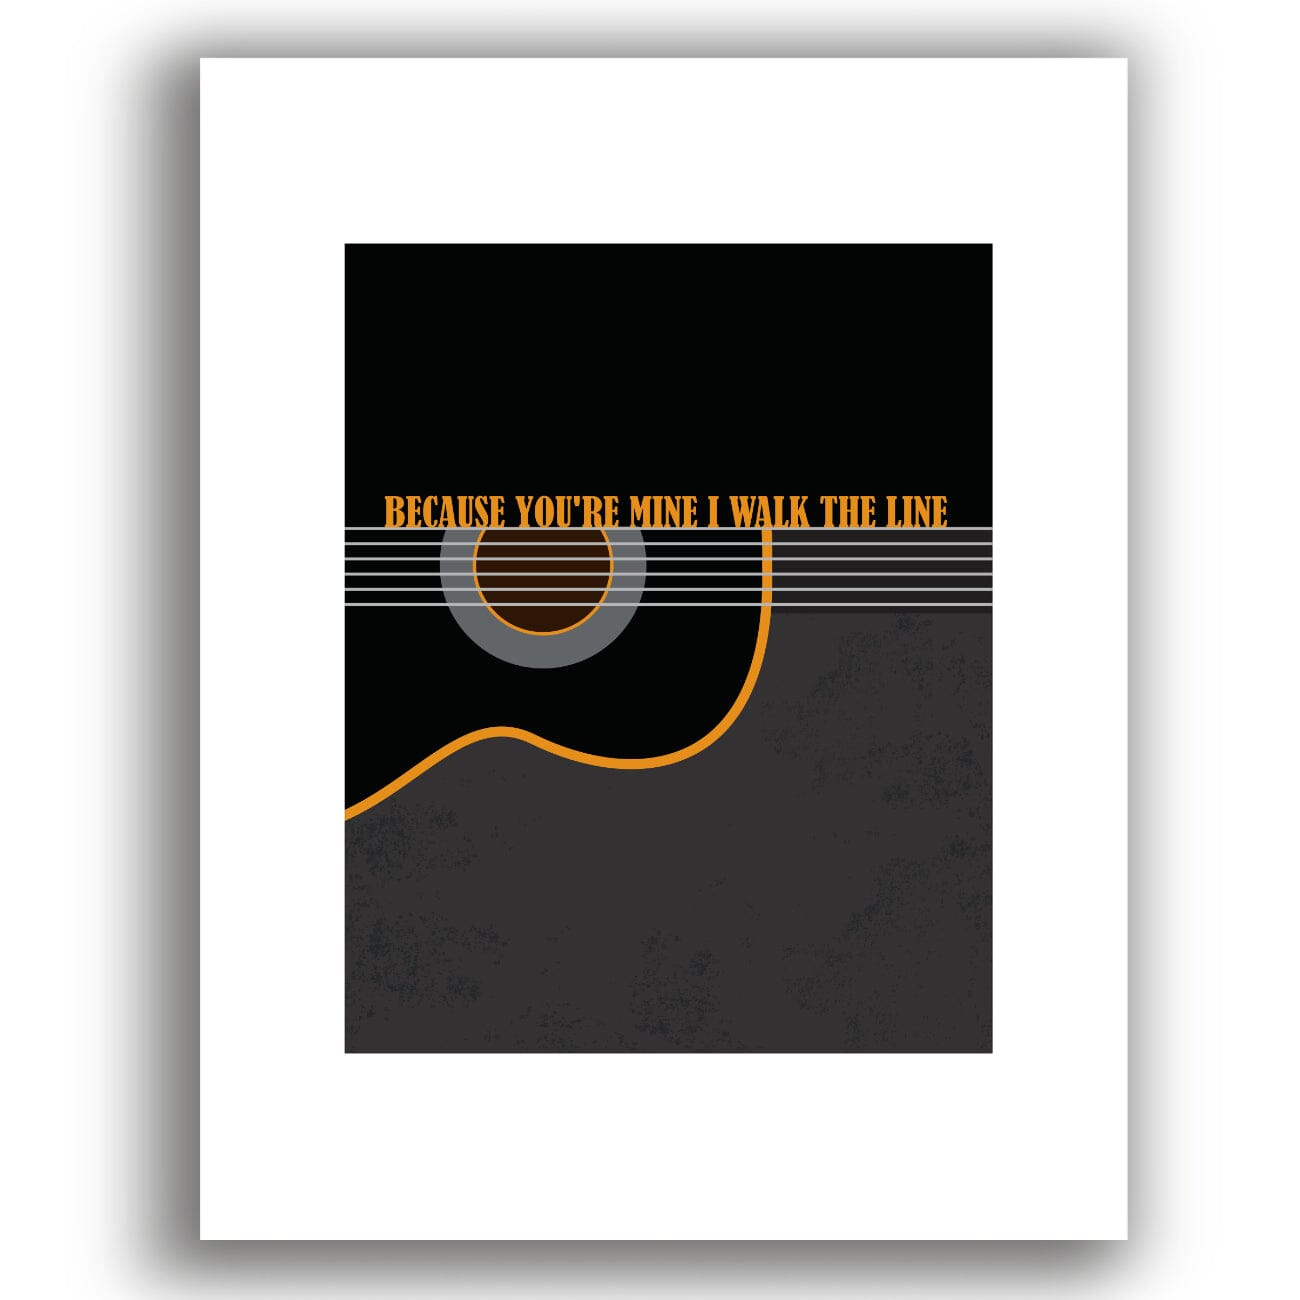 I Walk the Line by Johnny Cash - Song Lyric Country Music Art Song Lyrics Art Song Lyrics Art 8x10 White Matted Print 